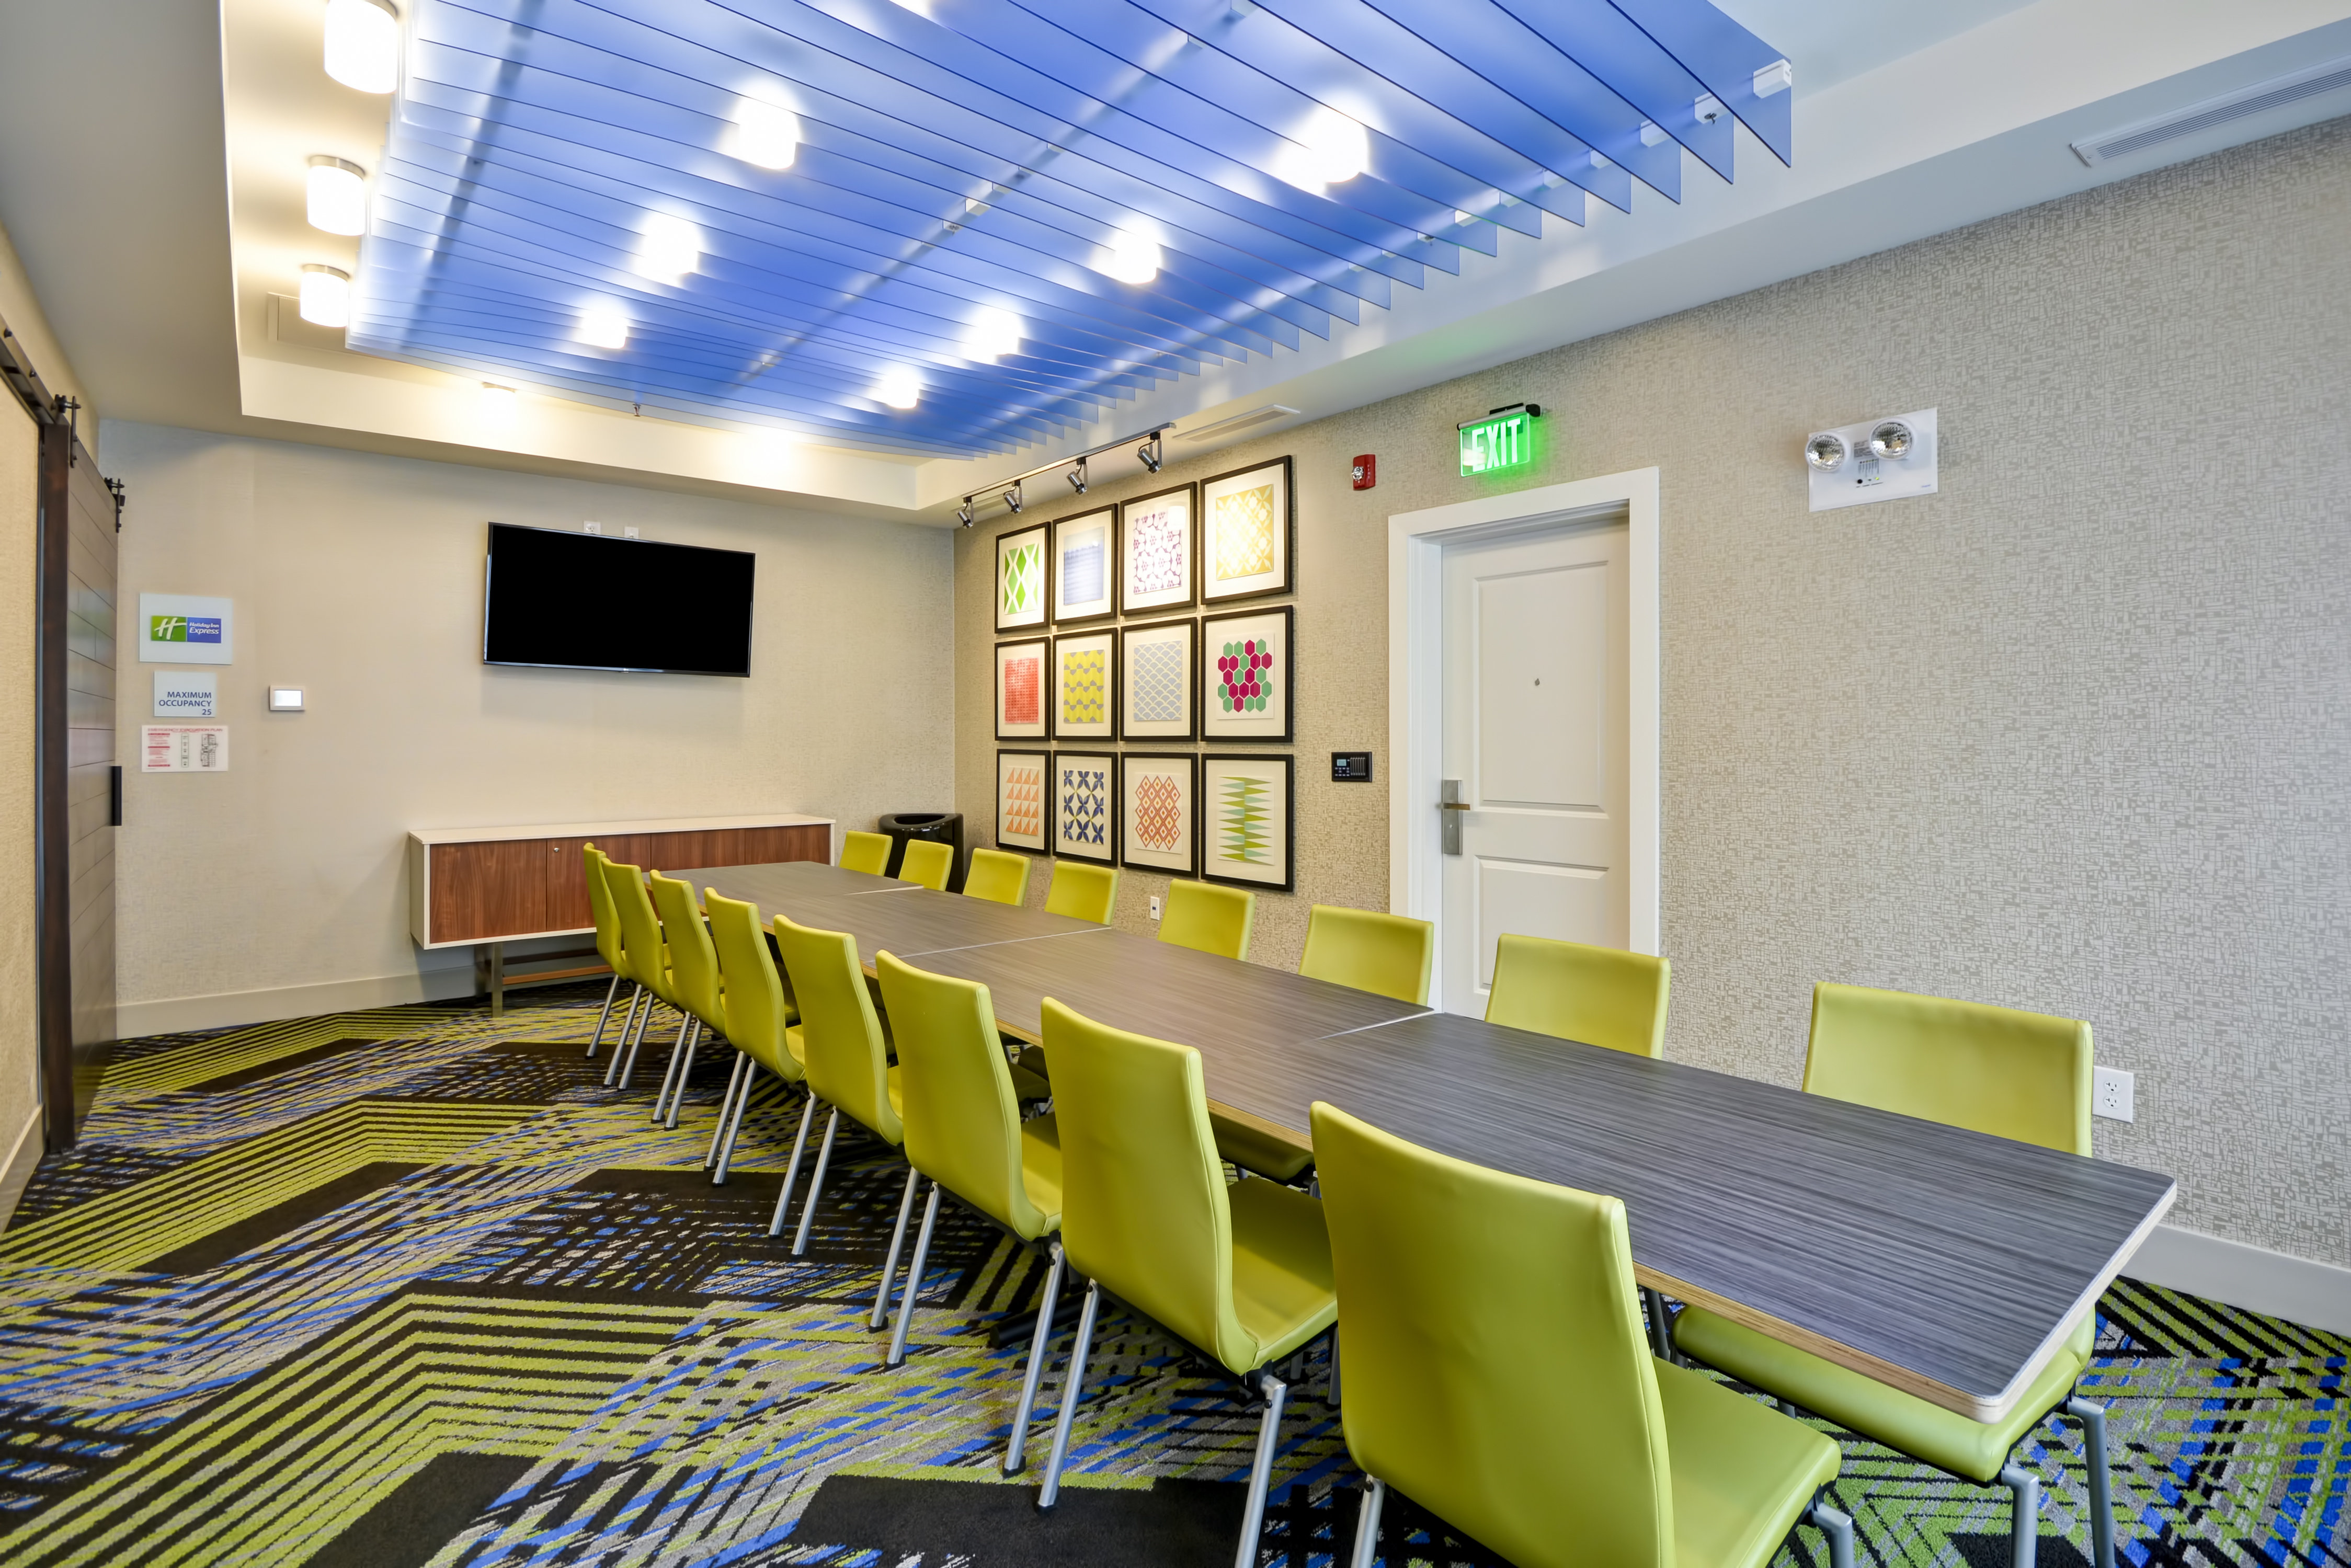  Host your next Board meeting at the Holiday Inn Express East 